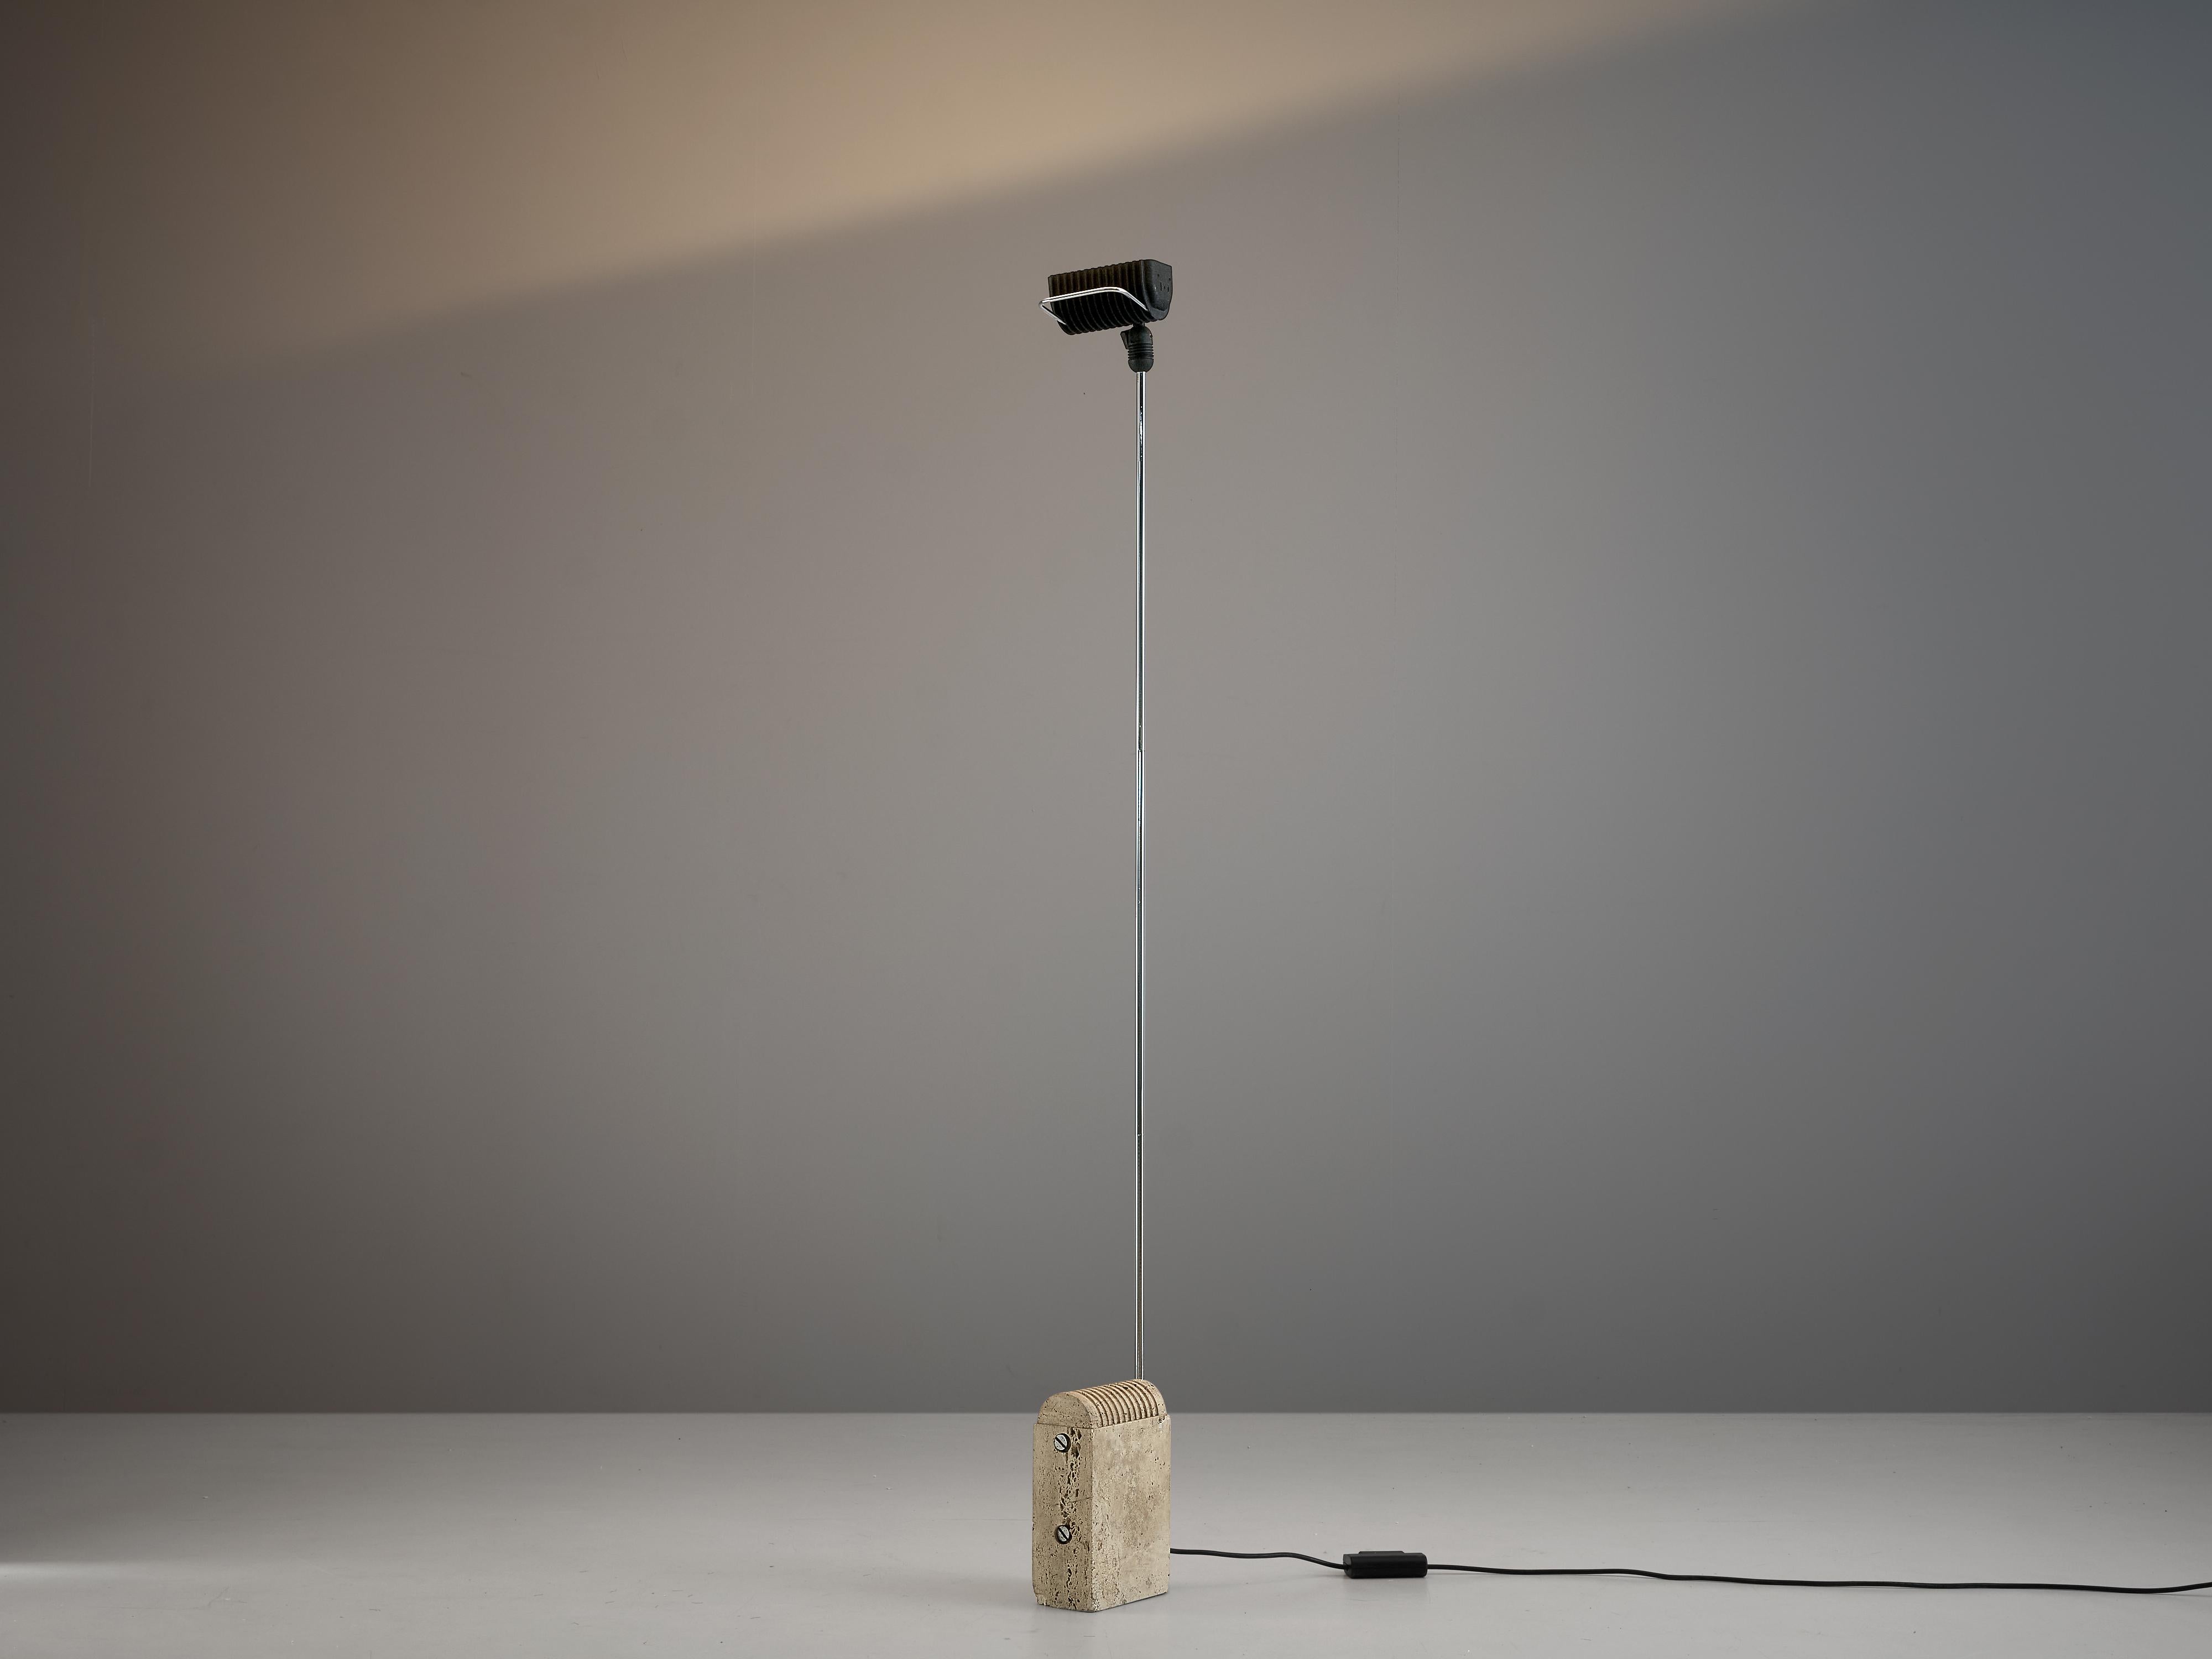 Floor lamp, travertine, aluminium, stainless steel, Italy, 1960s

Sleek floor lamp with a clean, modern look. This floor lamp has a streamlined appearance. The base of the lamp is made out of travertine which creates an industrial effect. The